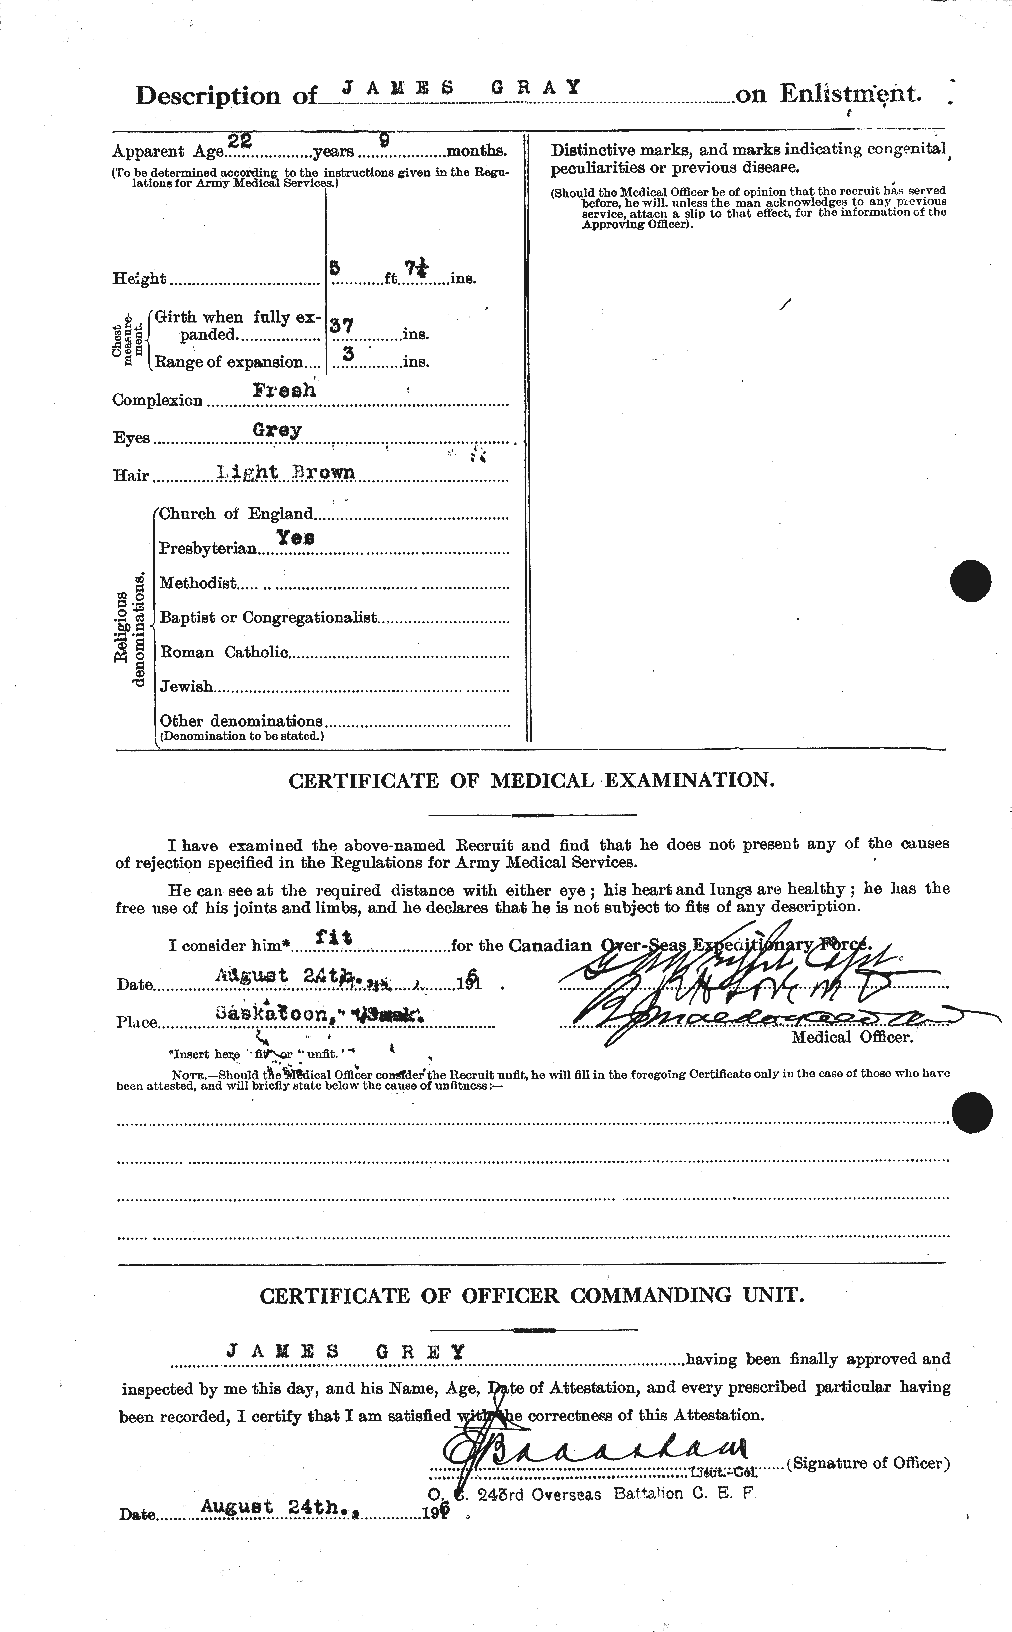 Personnel Records of the First World War - CEF 363279b